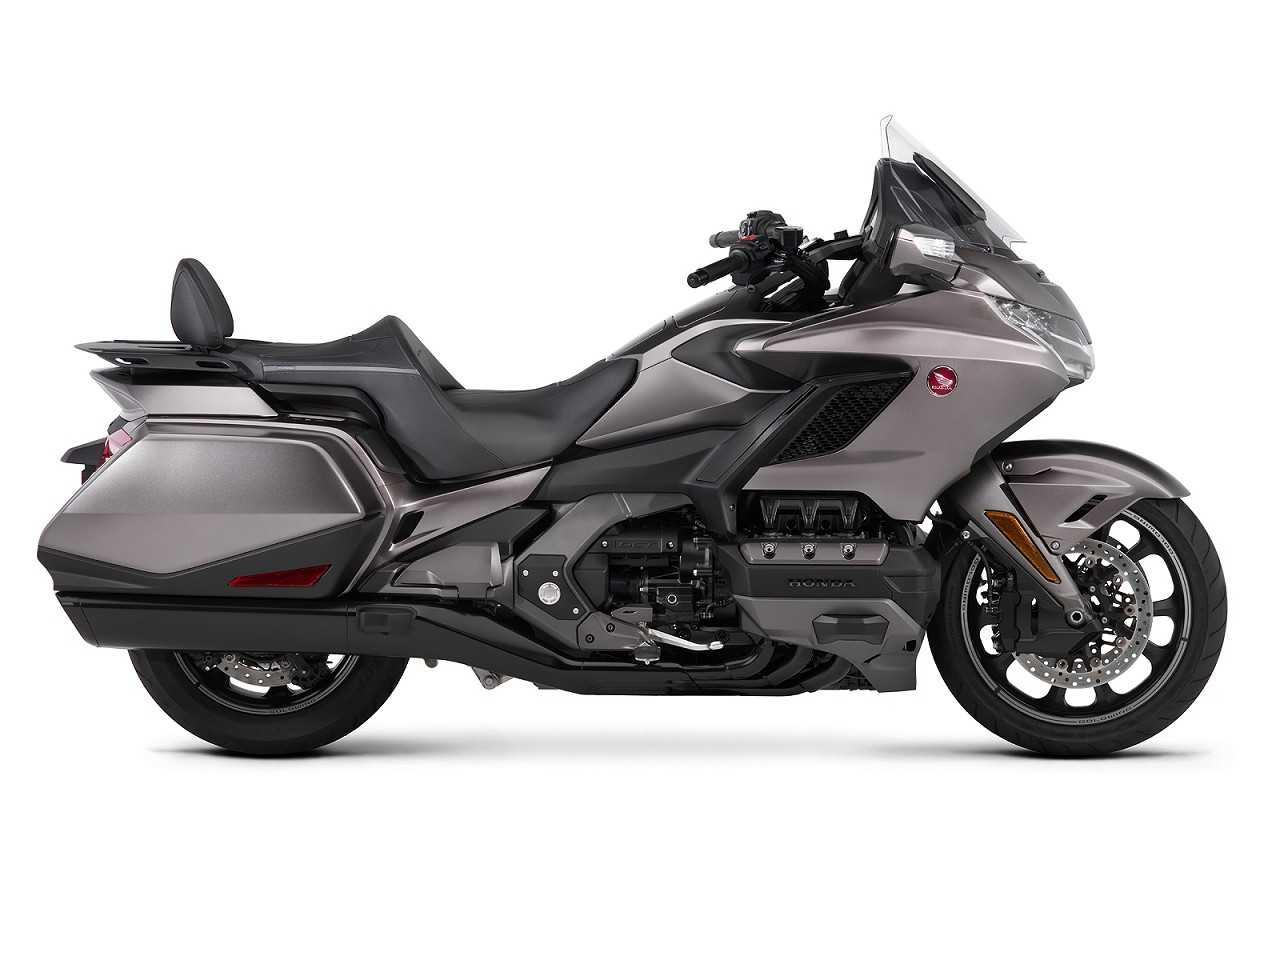 HondaGL 1800 Gold Wing 2018 - lateral